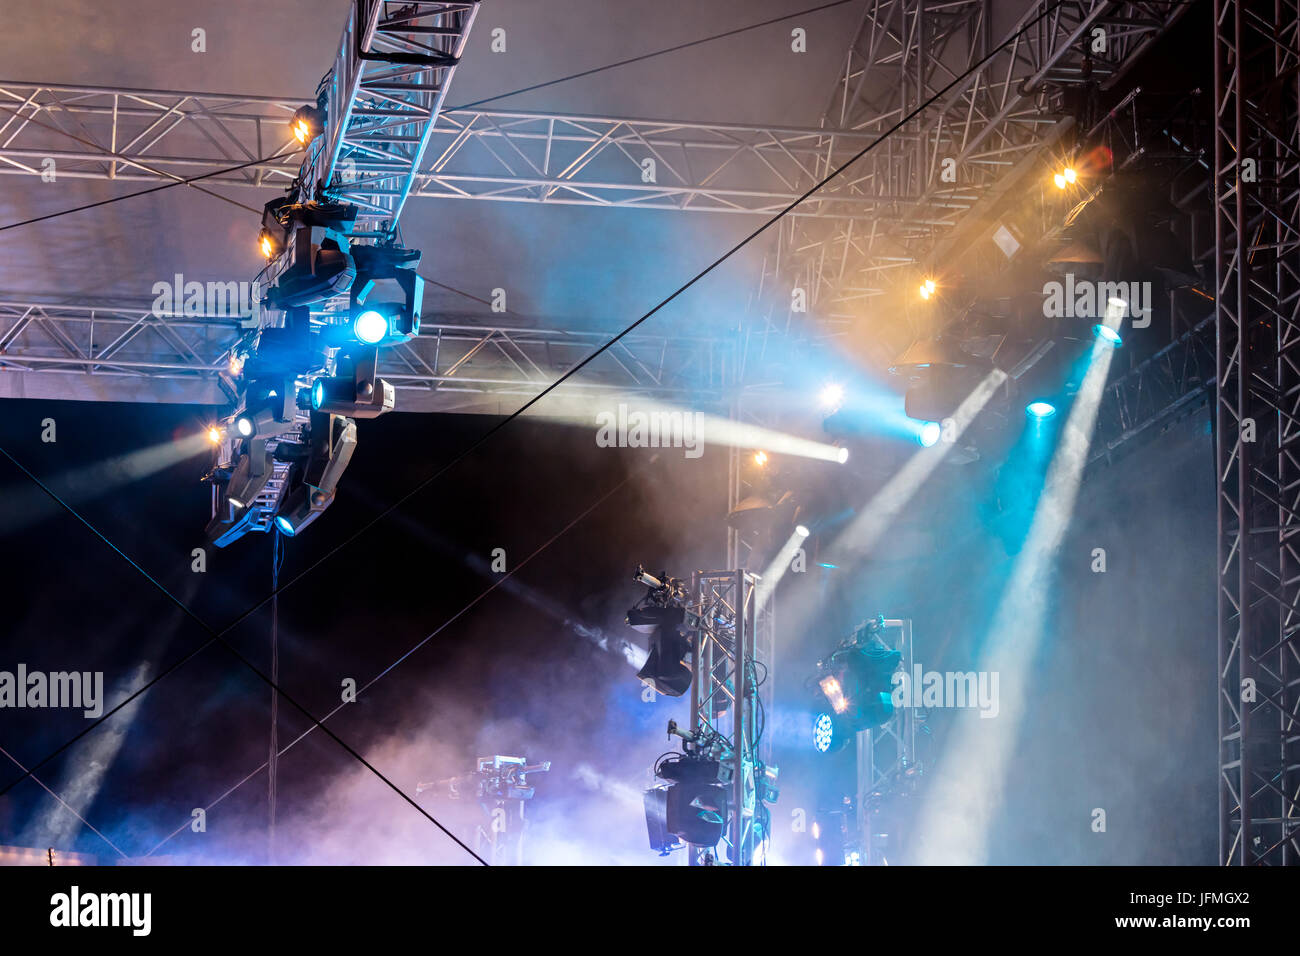 concert lighting on stage. lighting equipment with multi-colored beams. Stock Photo